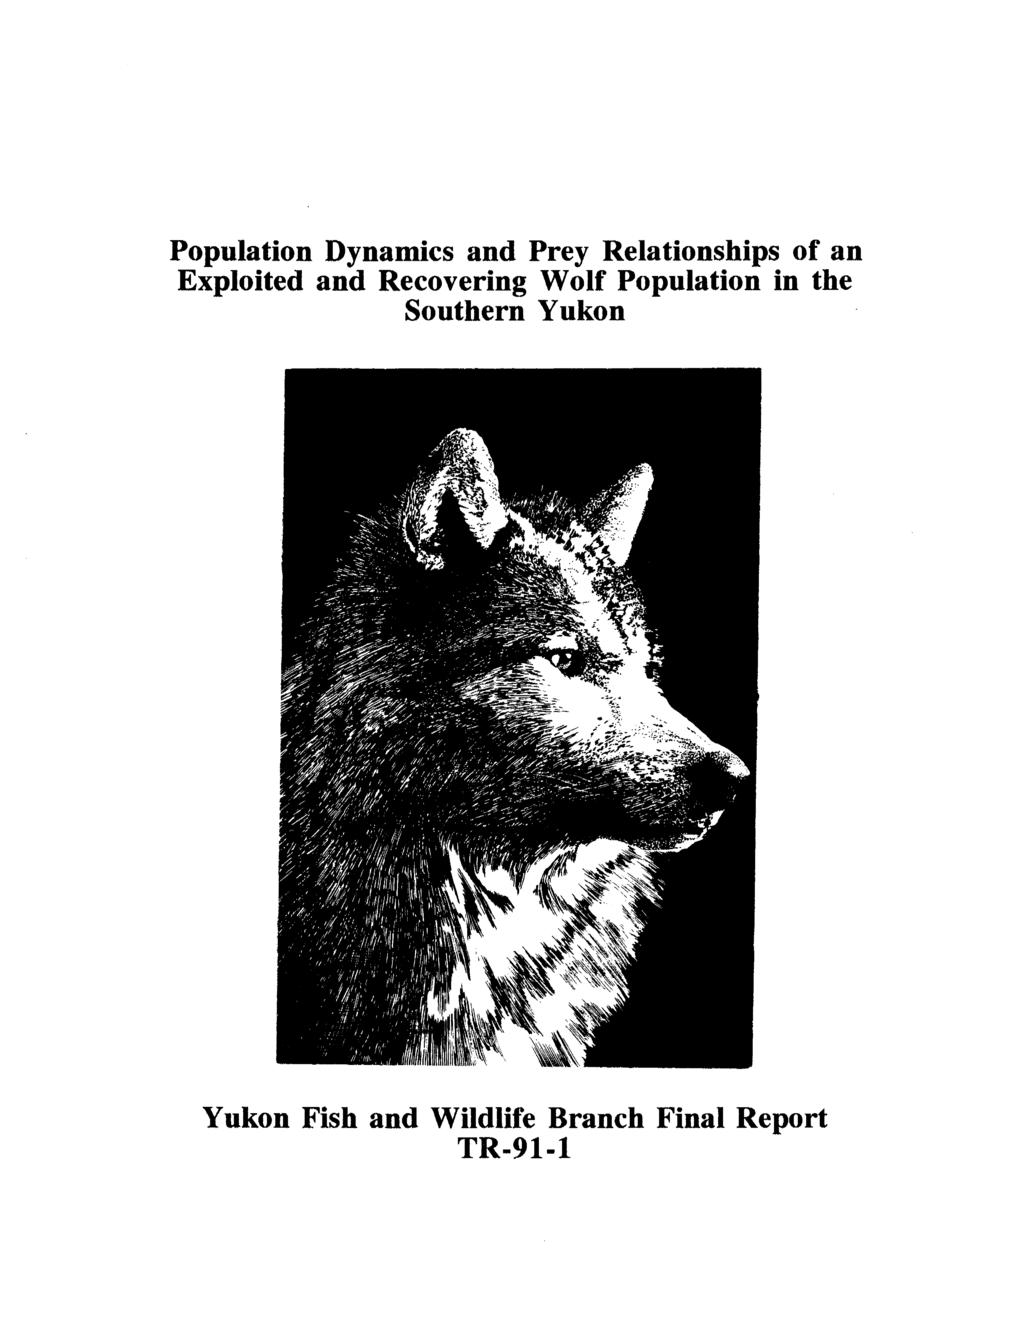 Population Dynamics and Prey Relationships of an Exploited and Recovering Wolf